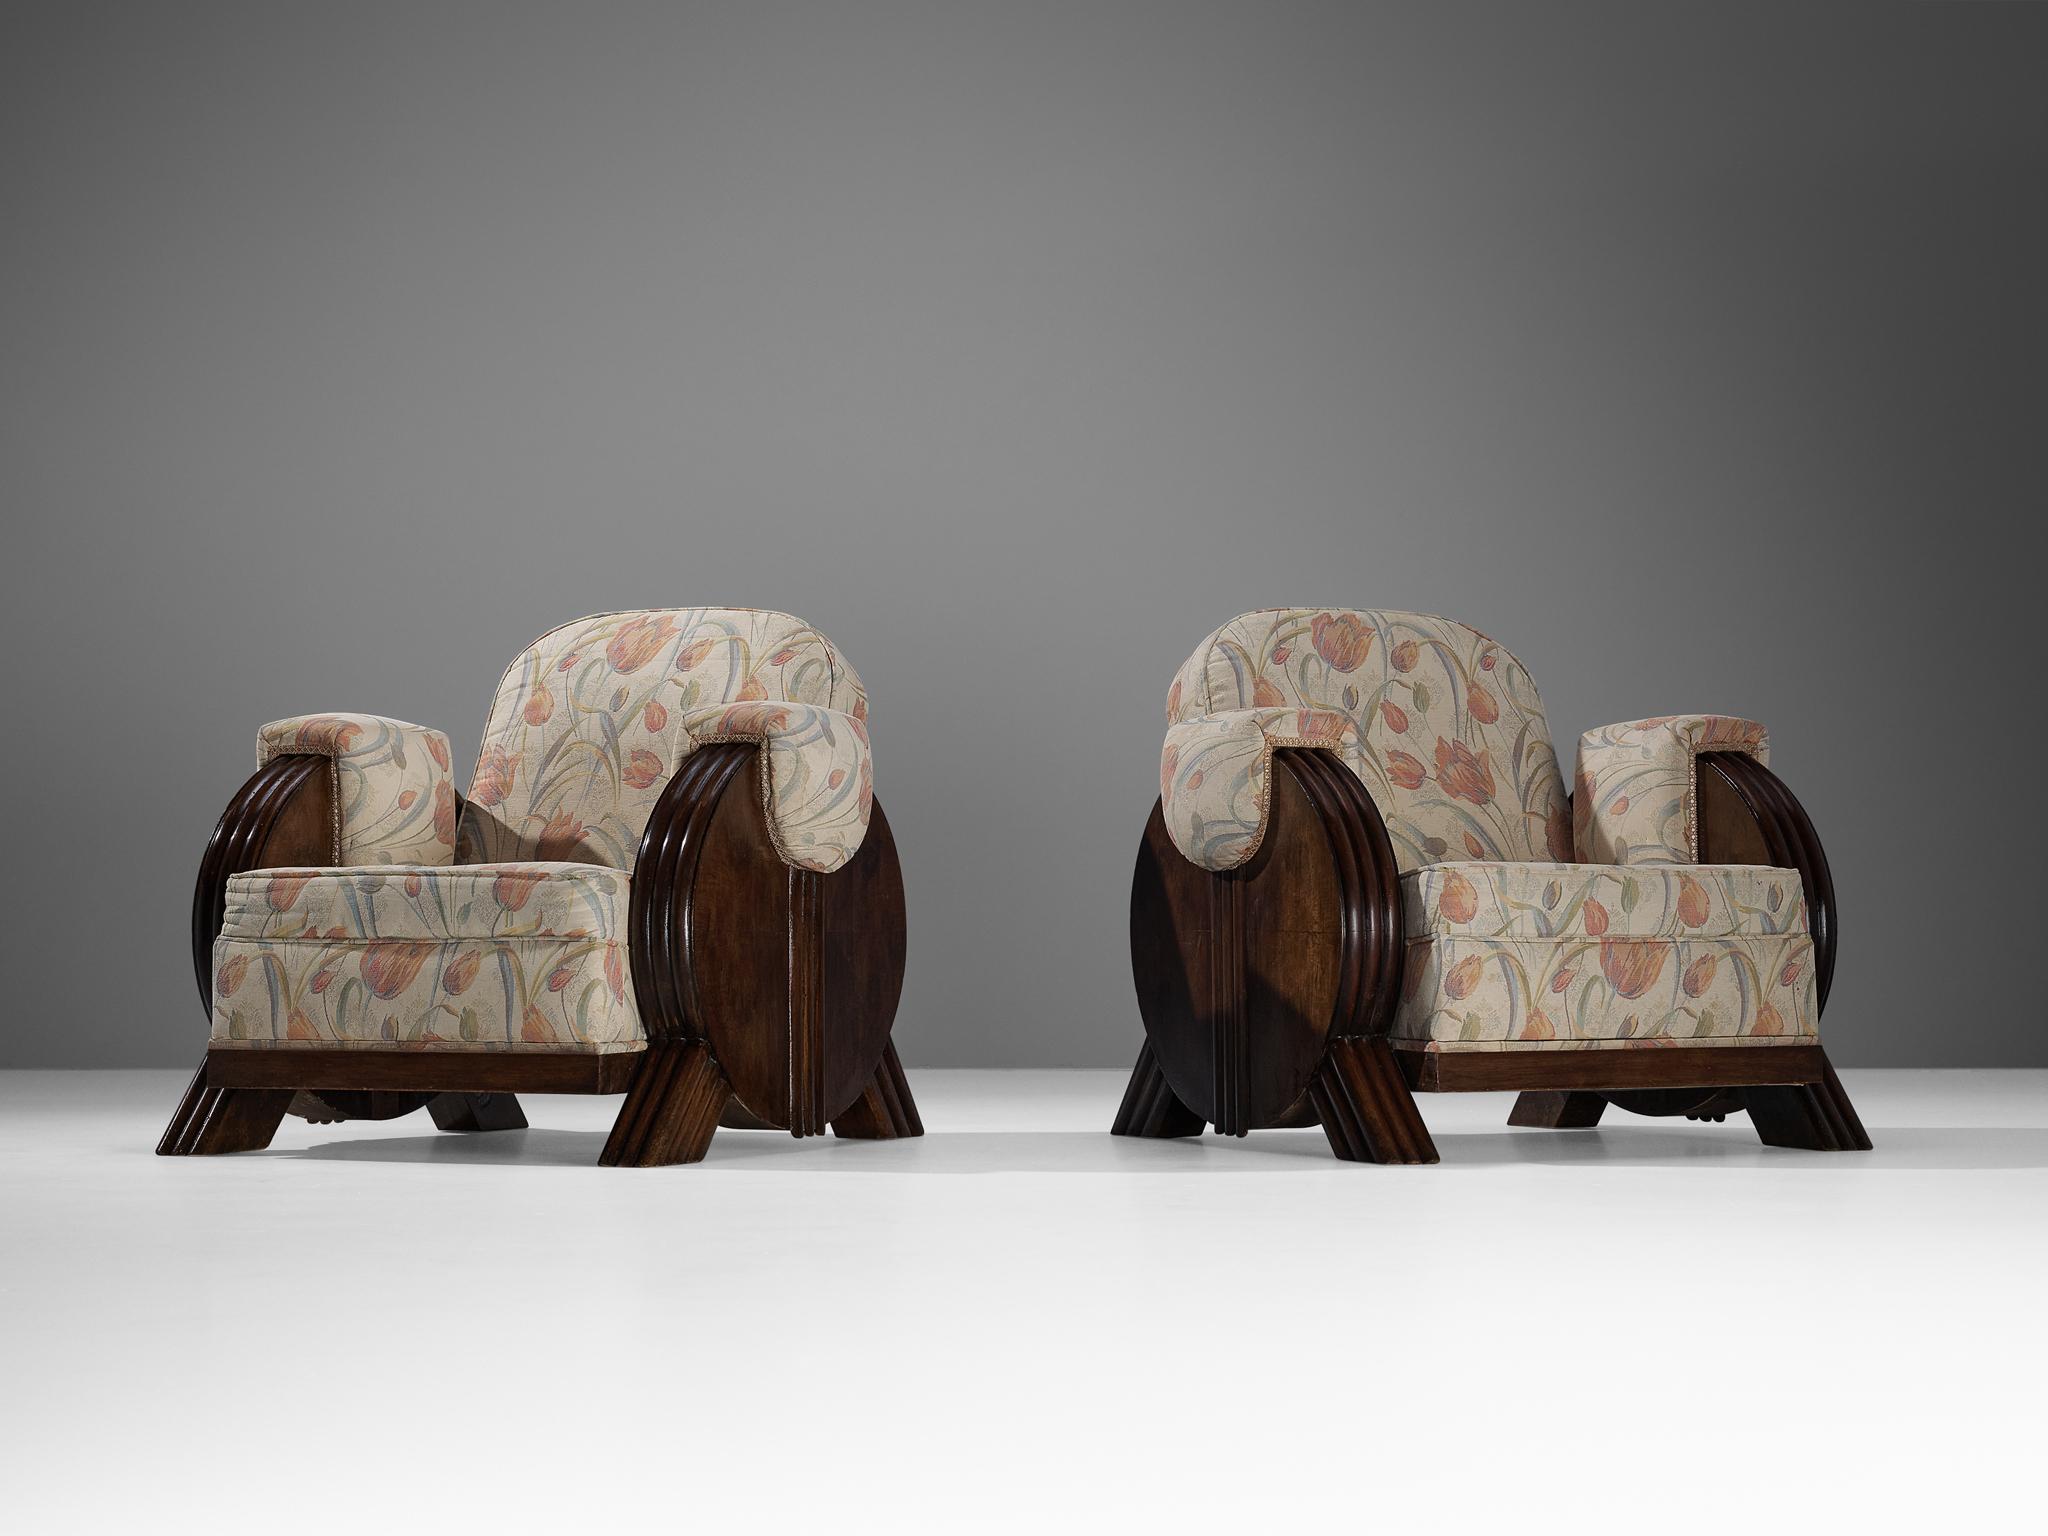 Pair of easy chairs, fabric, stained beech, brass, Europe, 1940s.

These armchairs exude the Art Deco style of the 1940s. With its imposing shapes, this design deserves a prominent place in one's interior. Truly exceptional about this piece are the